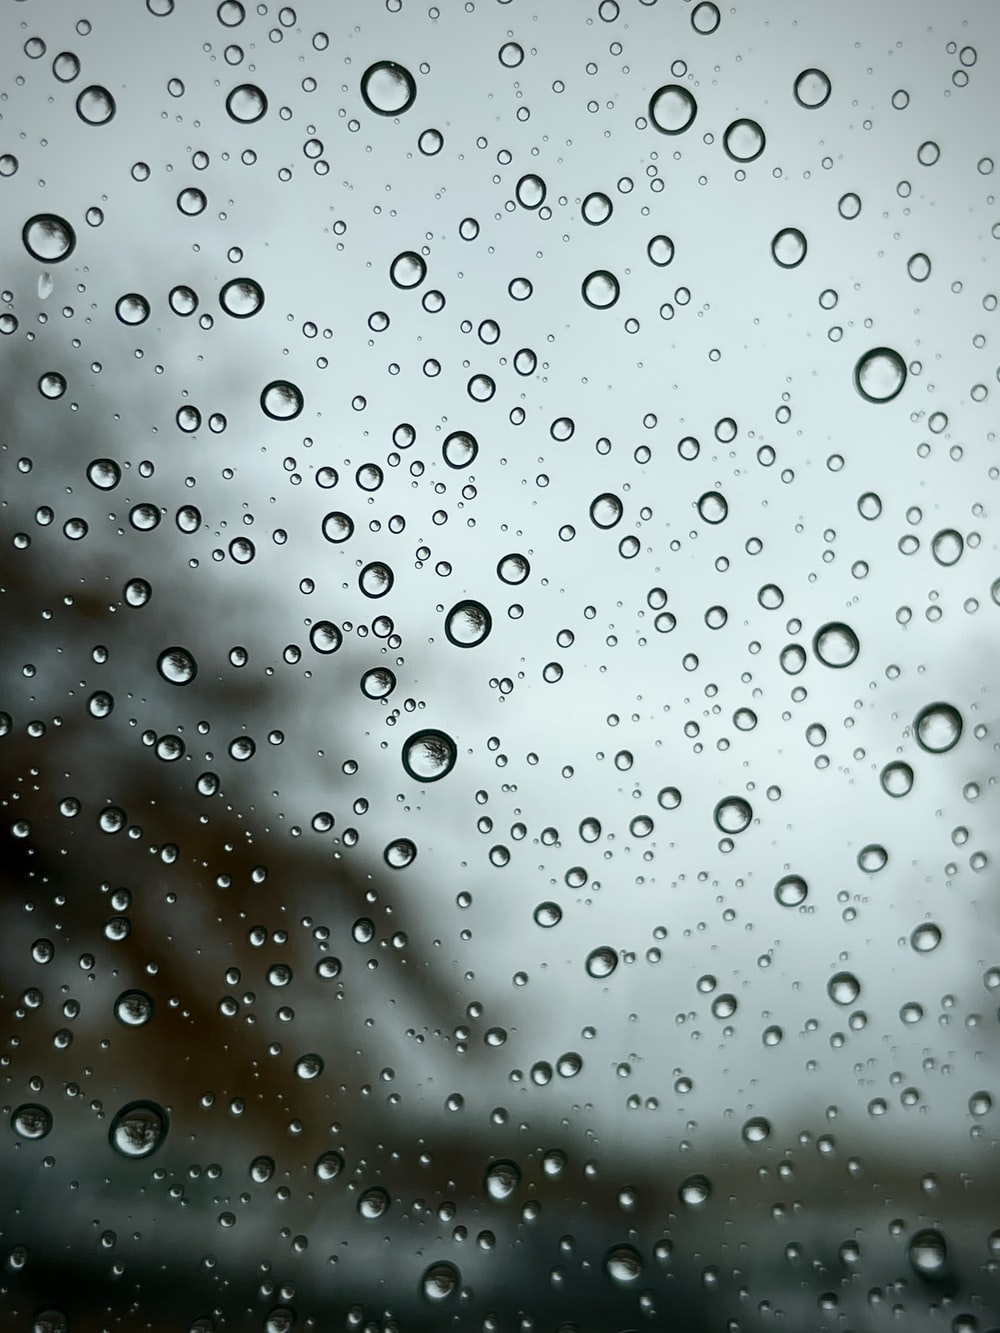 100 Raindrop Pictures [HD] Download Free Images on